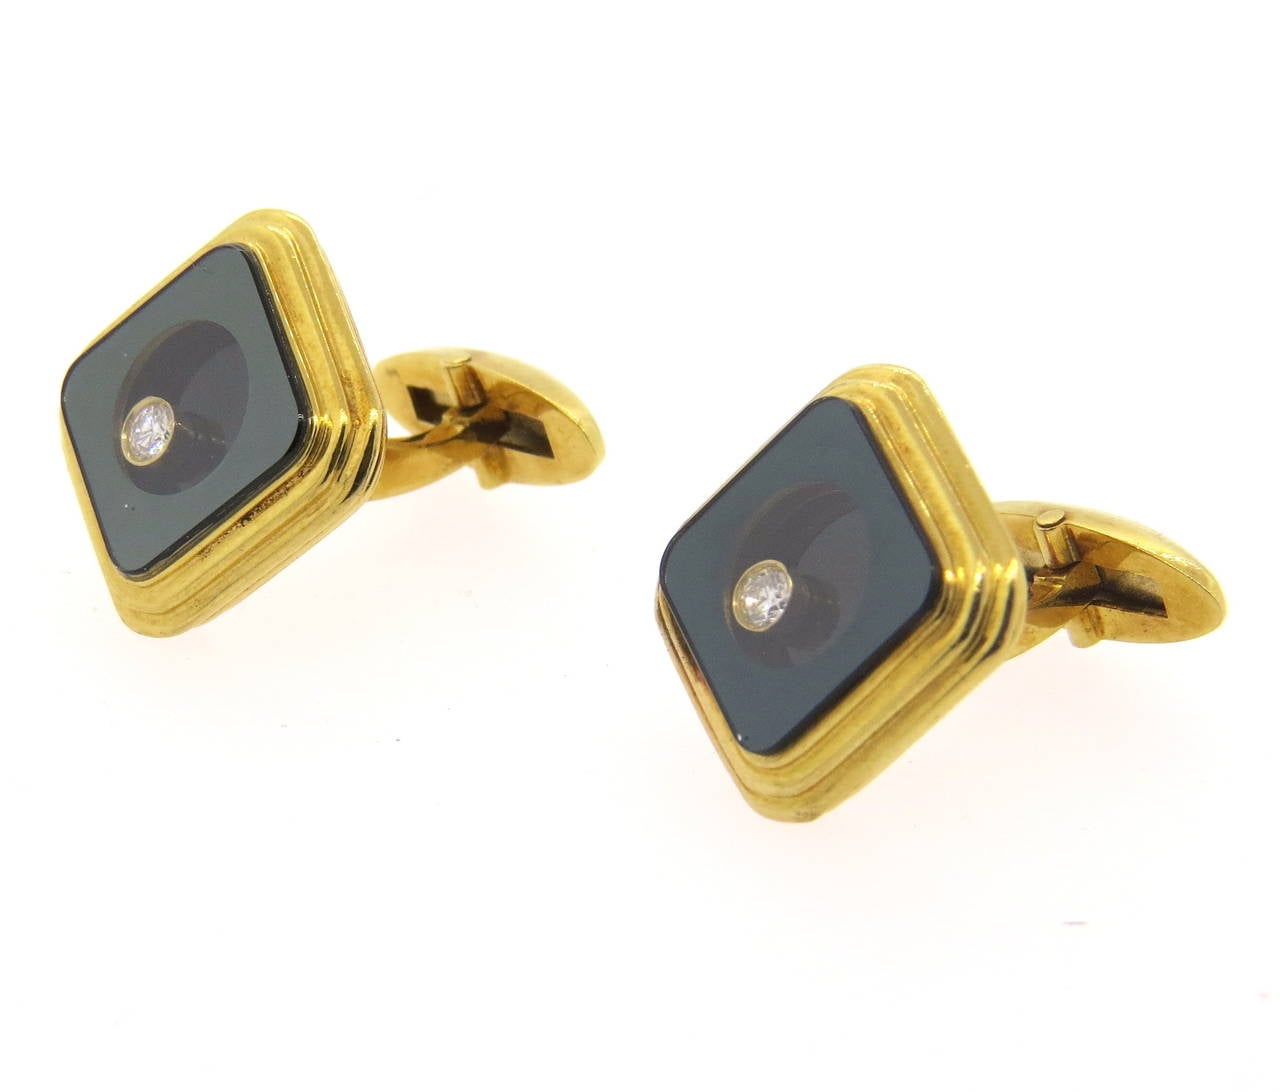 18k gold cufflinks, featuring floating diamonds in the center, approx. 0.05ct VS/G each. Cufflink top measures 16mm x 16mm. Weight - 22.4 grams